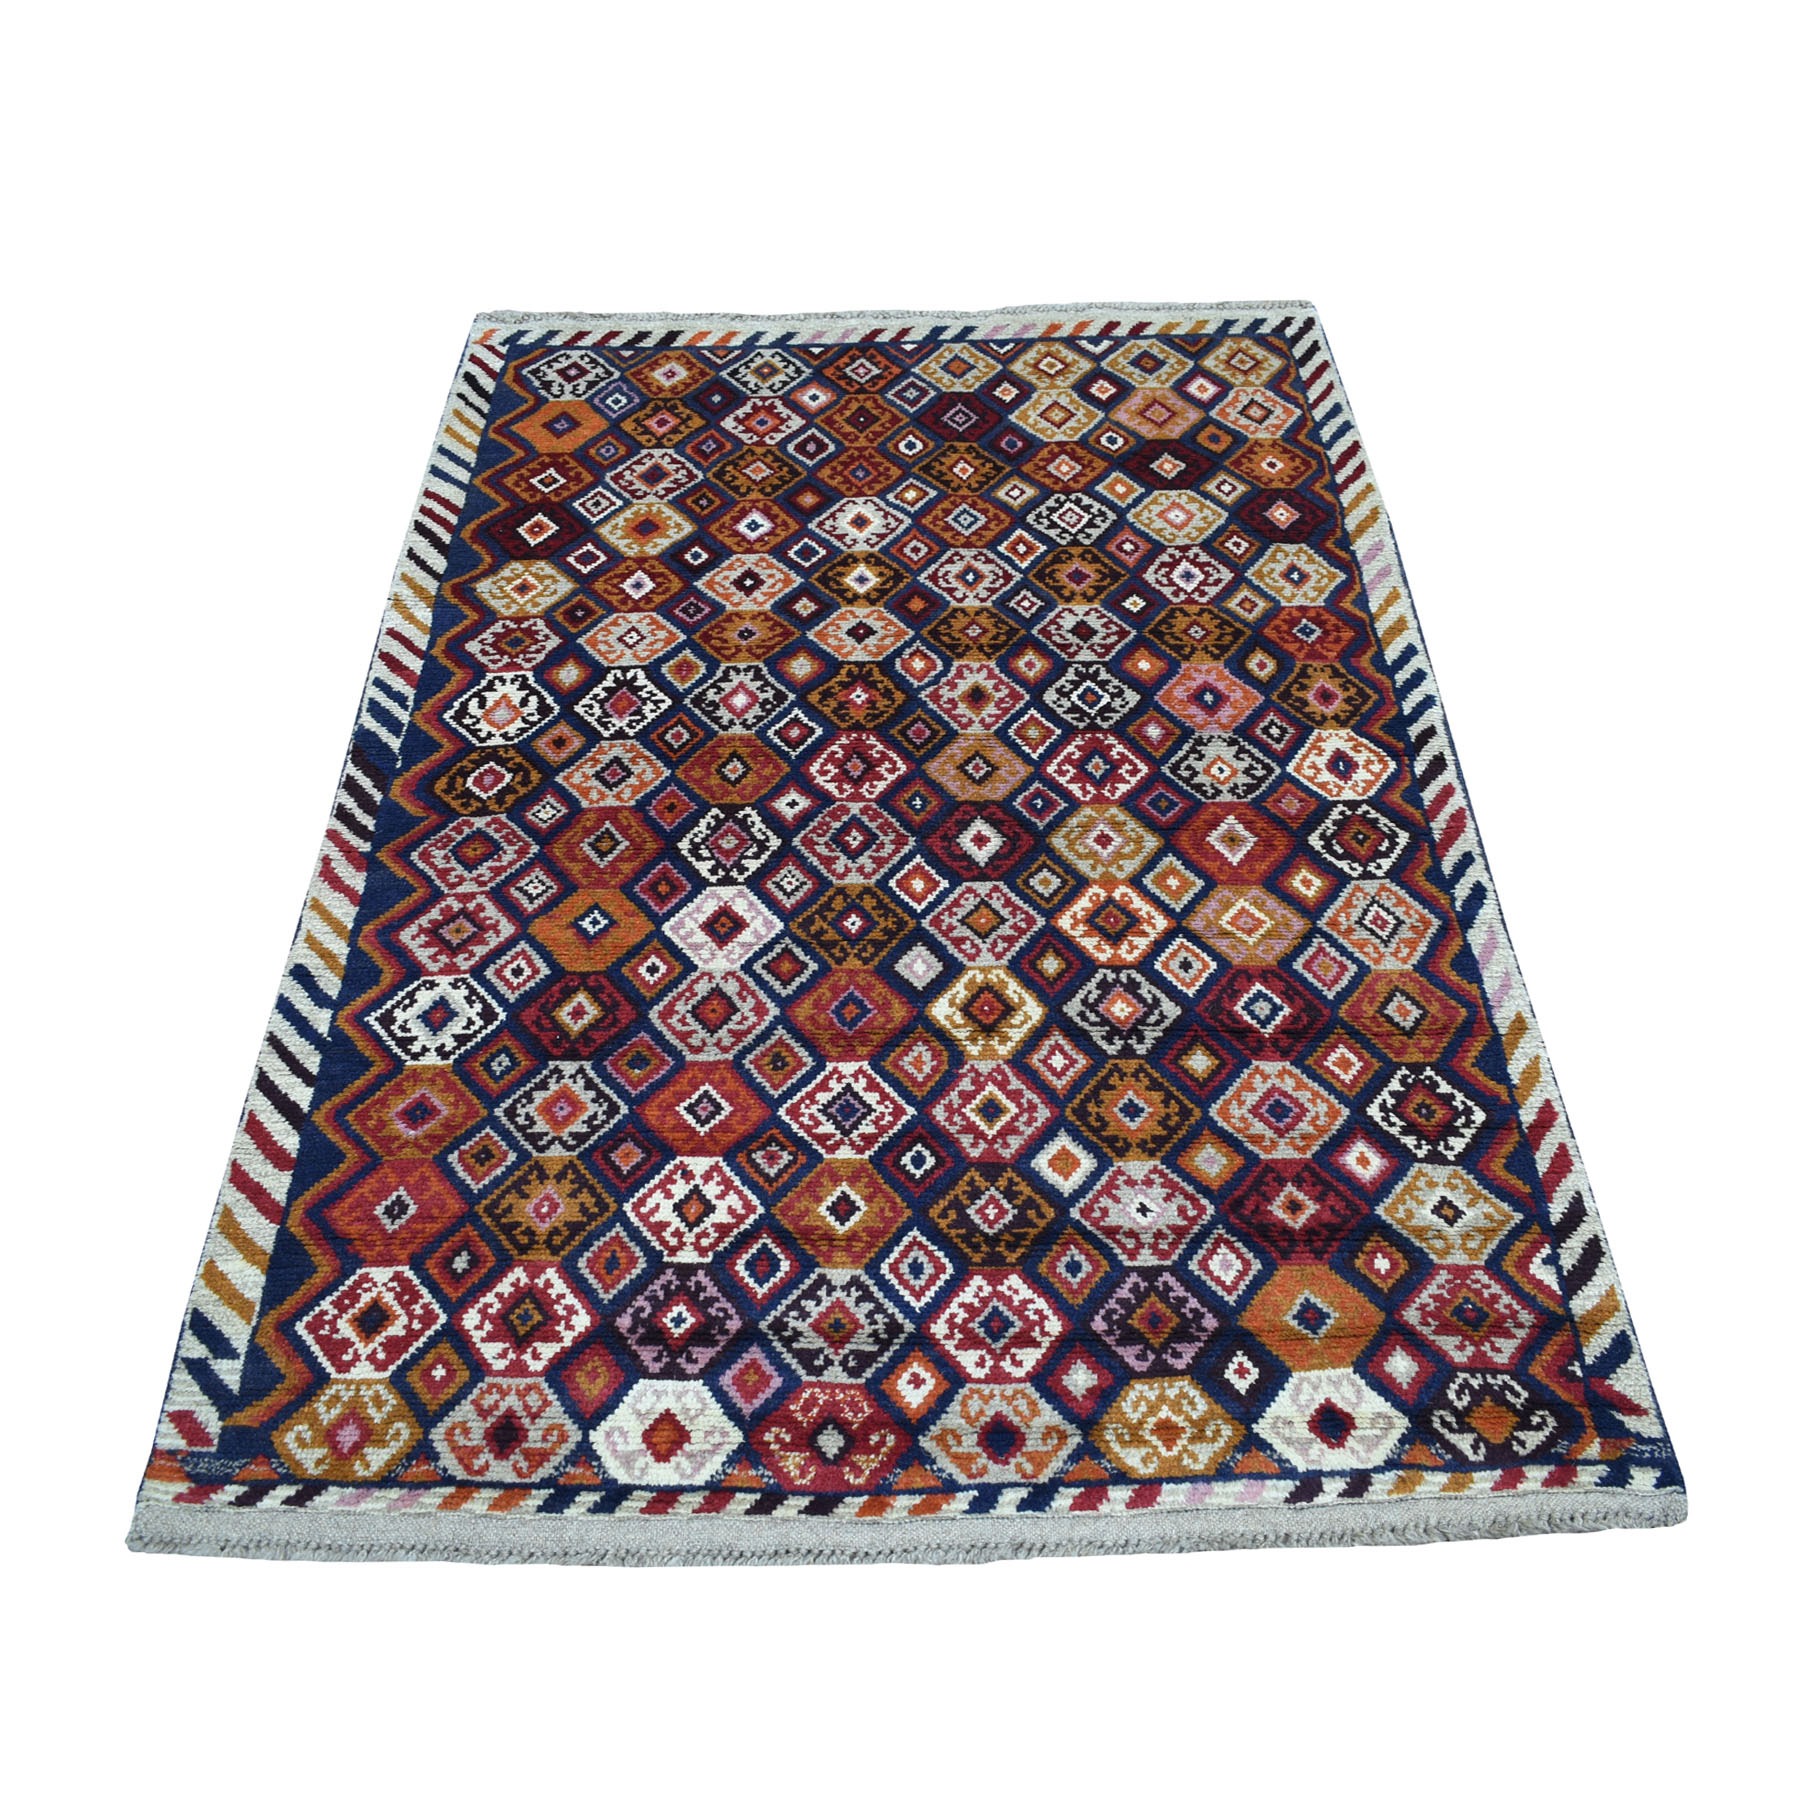 3'10"x6' Blue Tribal Design Hand Woven Colorful Afghan Baluch Pure Wool Oriental Rug 